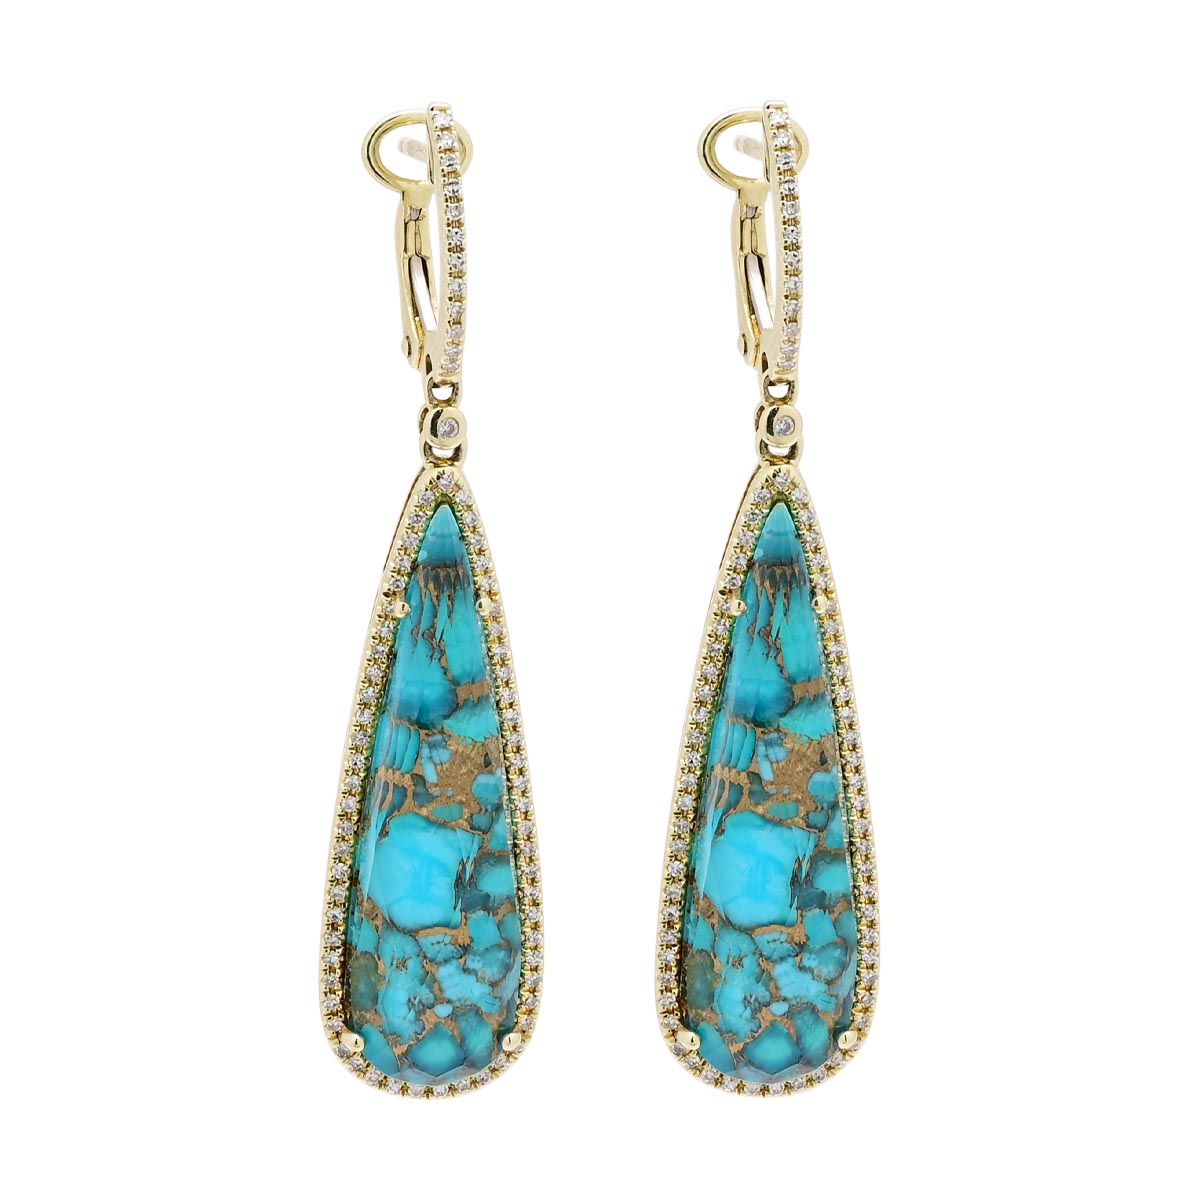 Dabakarov Pear Shape Turquoise and White Quartz Drop Earrings in 14kt Yellow Gold with Diamonds (1/3ct tw)